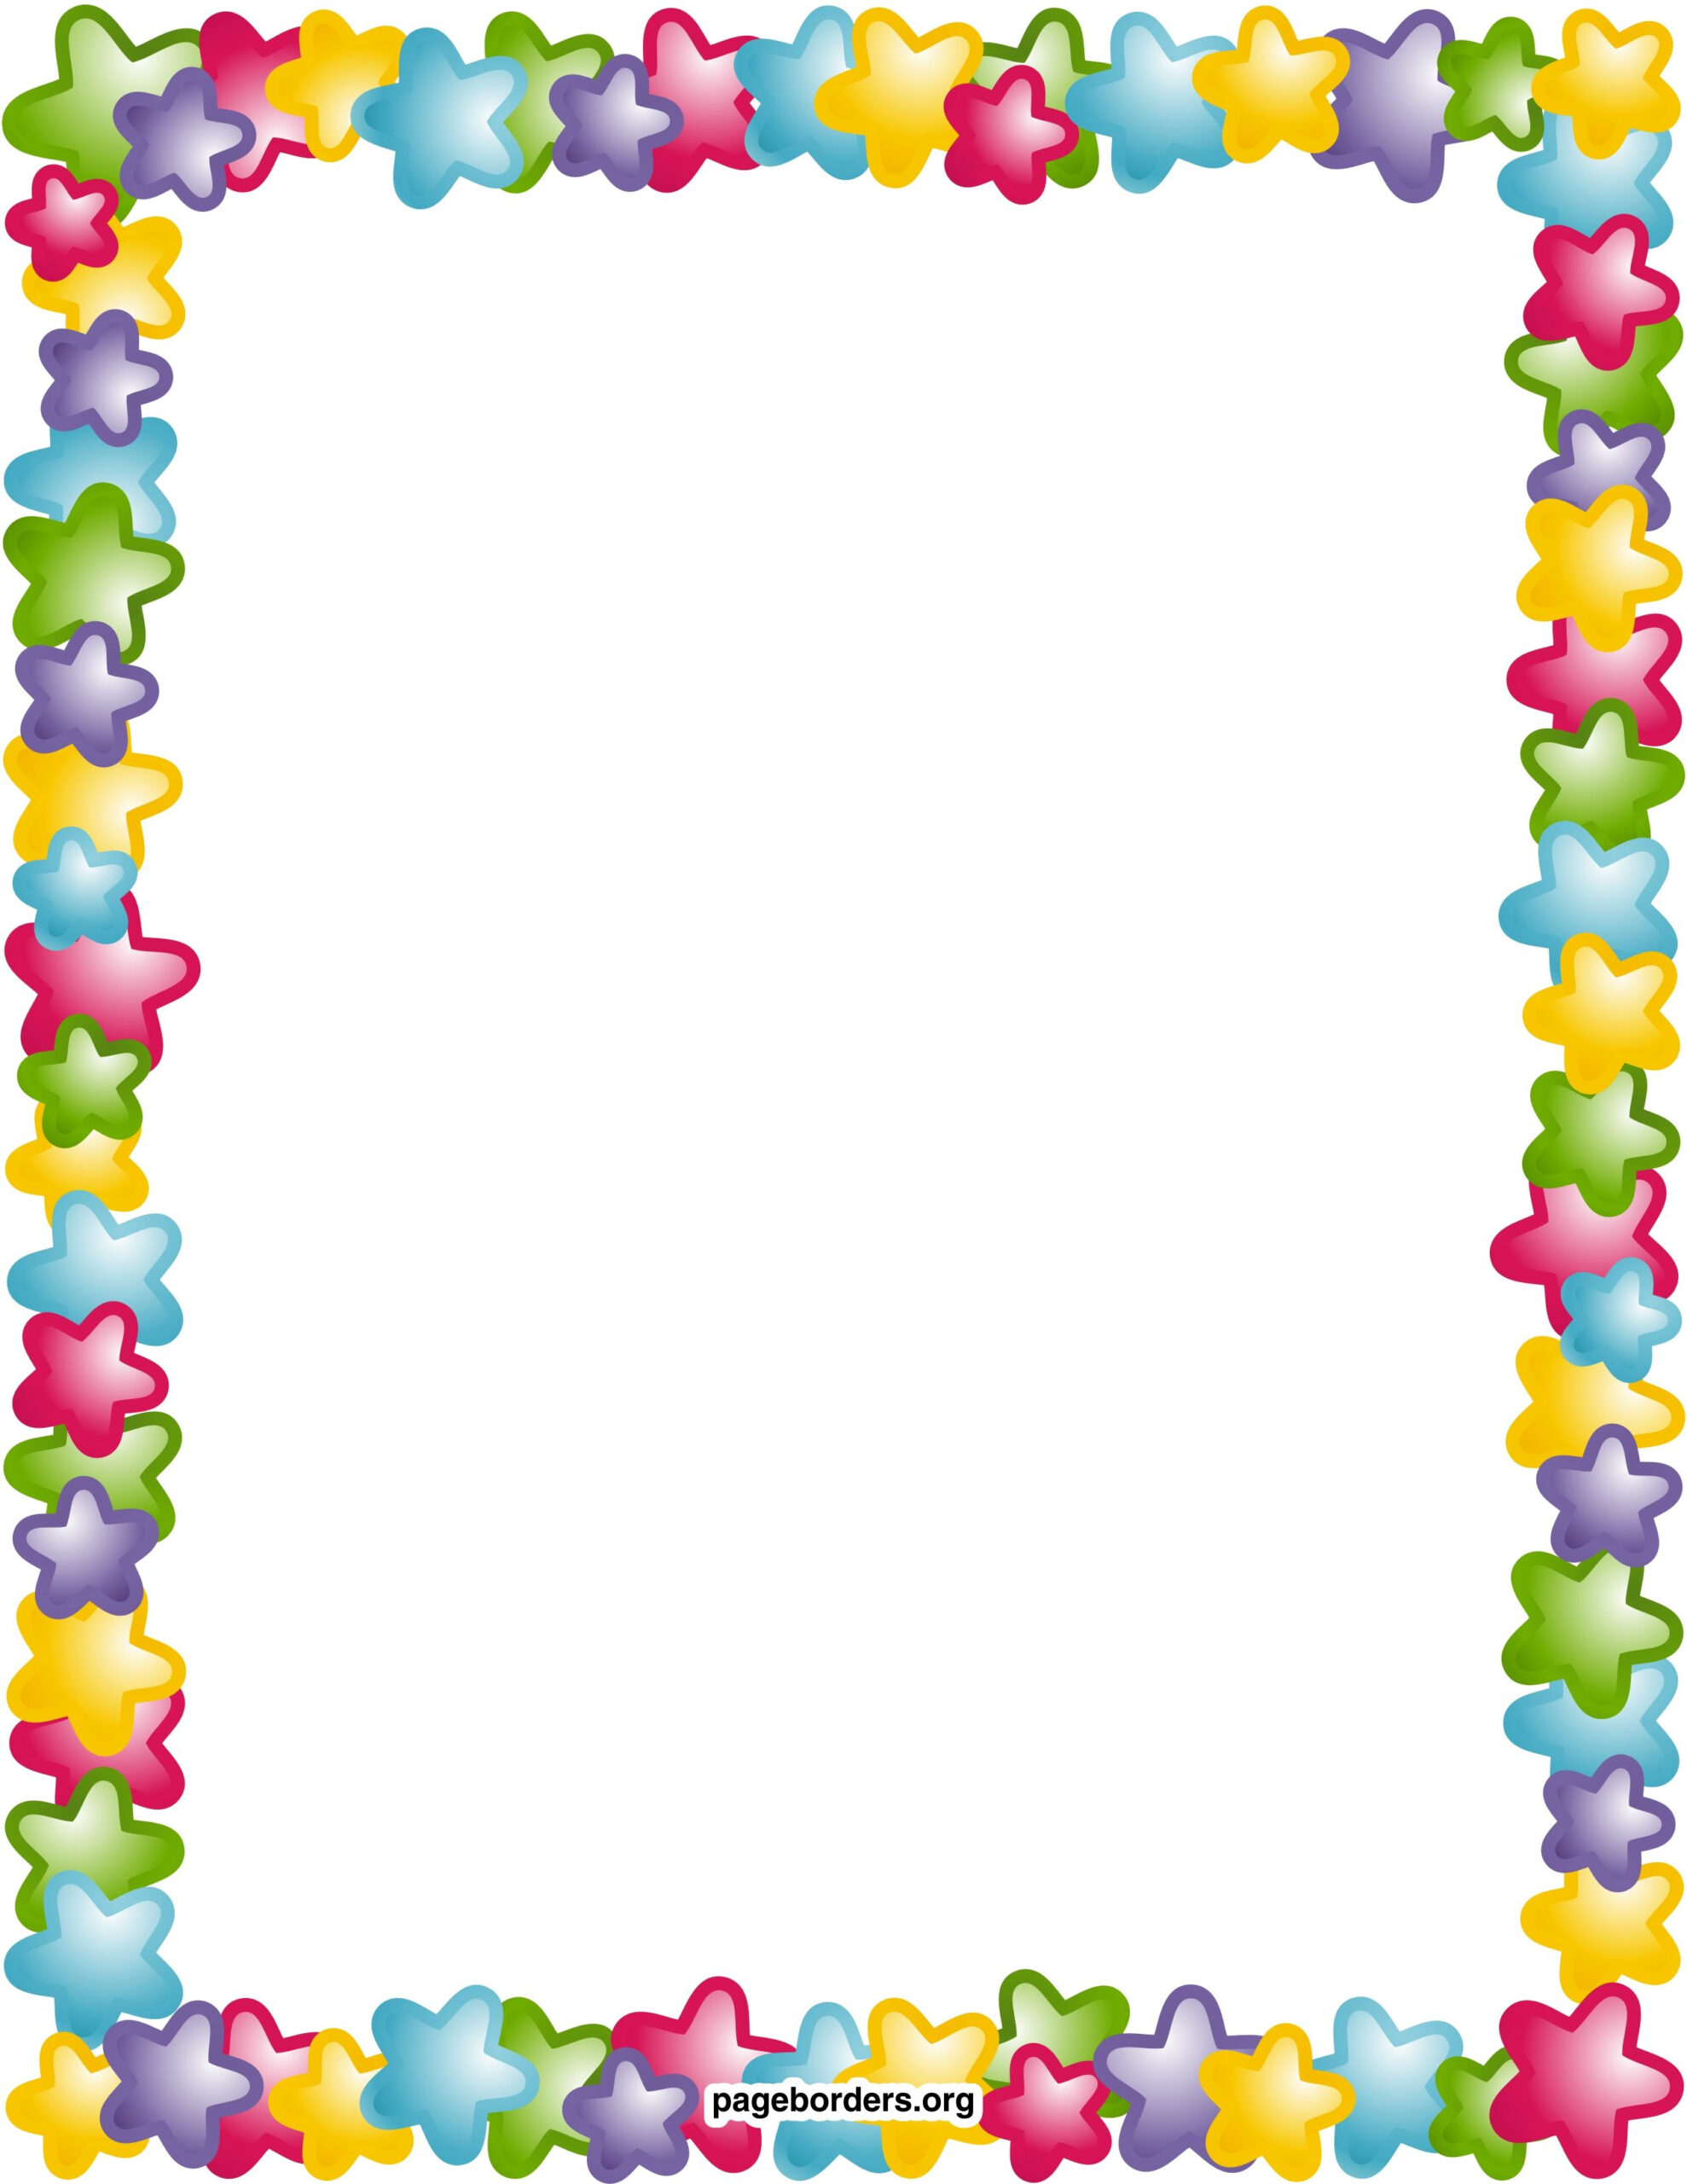 Free Printable Page Borders And Frames Image Gallery Clip Art Borders 